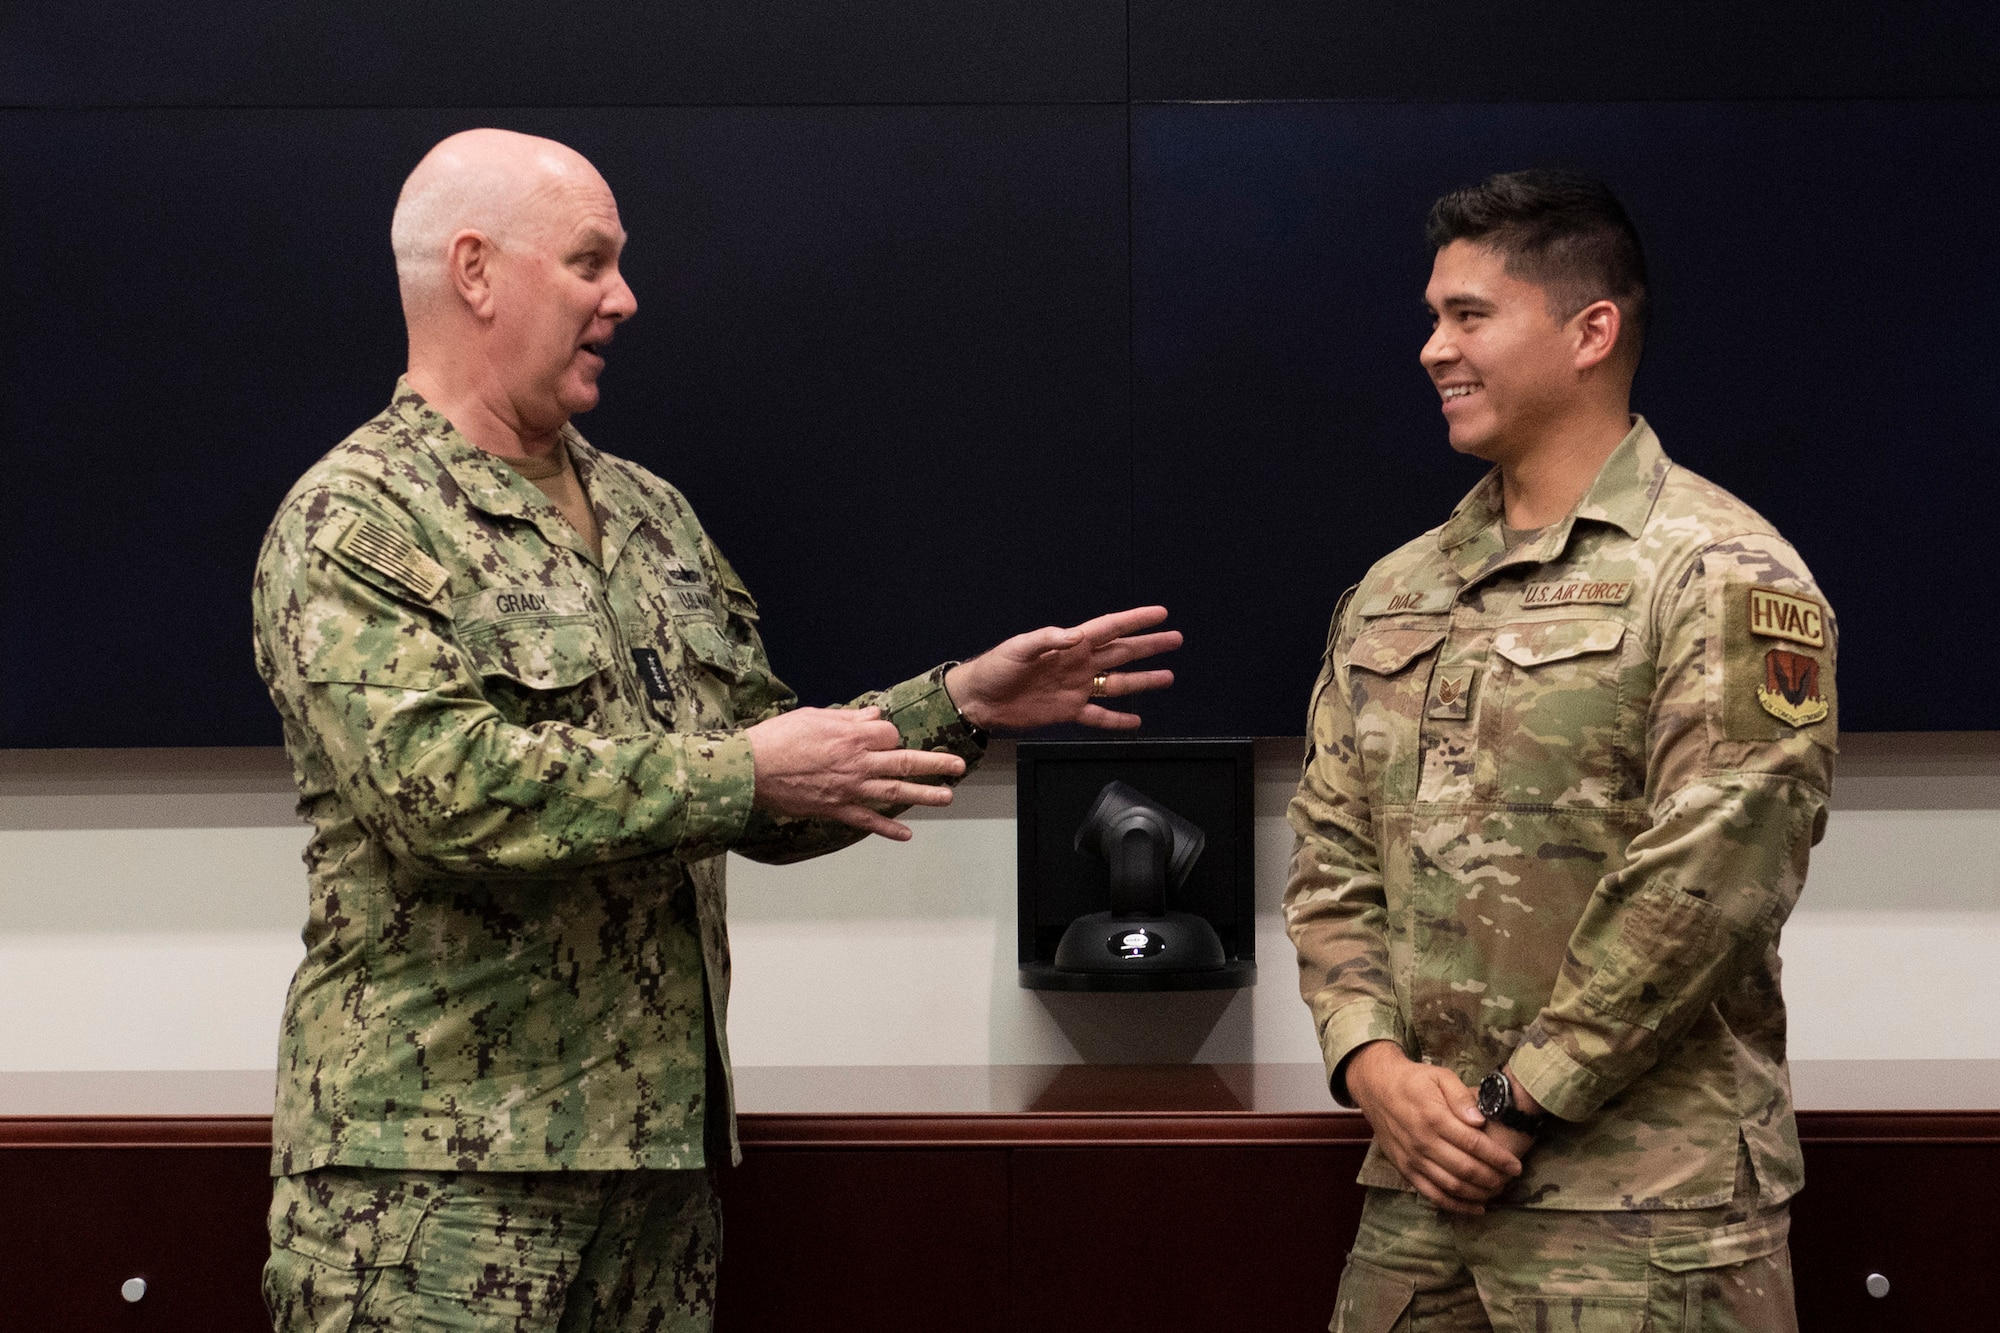 Admiral Christopher W. Grady (left), Vice Chairman of the Joint Chiefs of Staff, presents his military challenge coin to Air Force Tech. Sgt. Diego Diaz, an HVAC supervisor assigned to the Air Force Technical Applications Center’s 709th Support Squadron, Patrick Space Force Base, Fla.  The vice chairman visited the nuclear treaty monitoring center June 9, 2023 to learn more about how AFTAC delivers decisive advantage against enduring weapons of mass destruction threats and emerging weapon systems.  (U.S. Air Force photo by Matthew S. Jurgens)